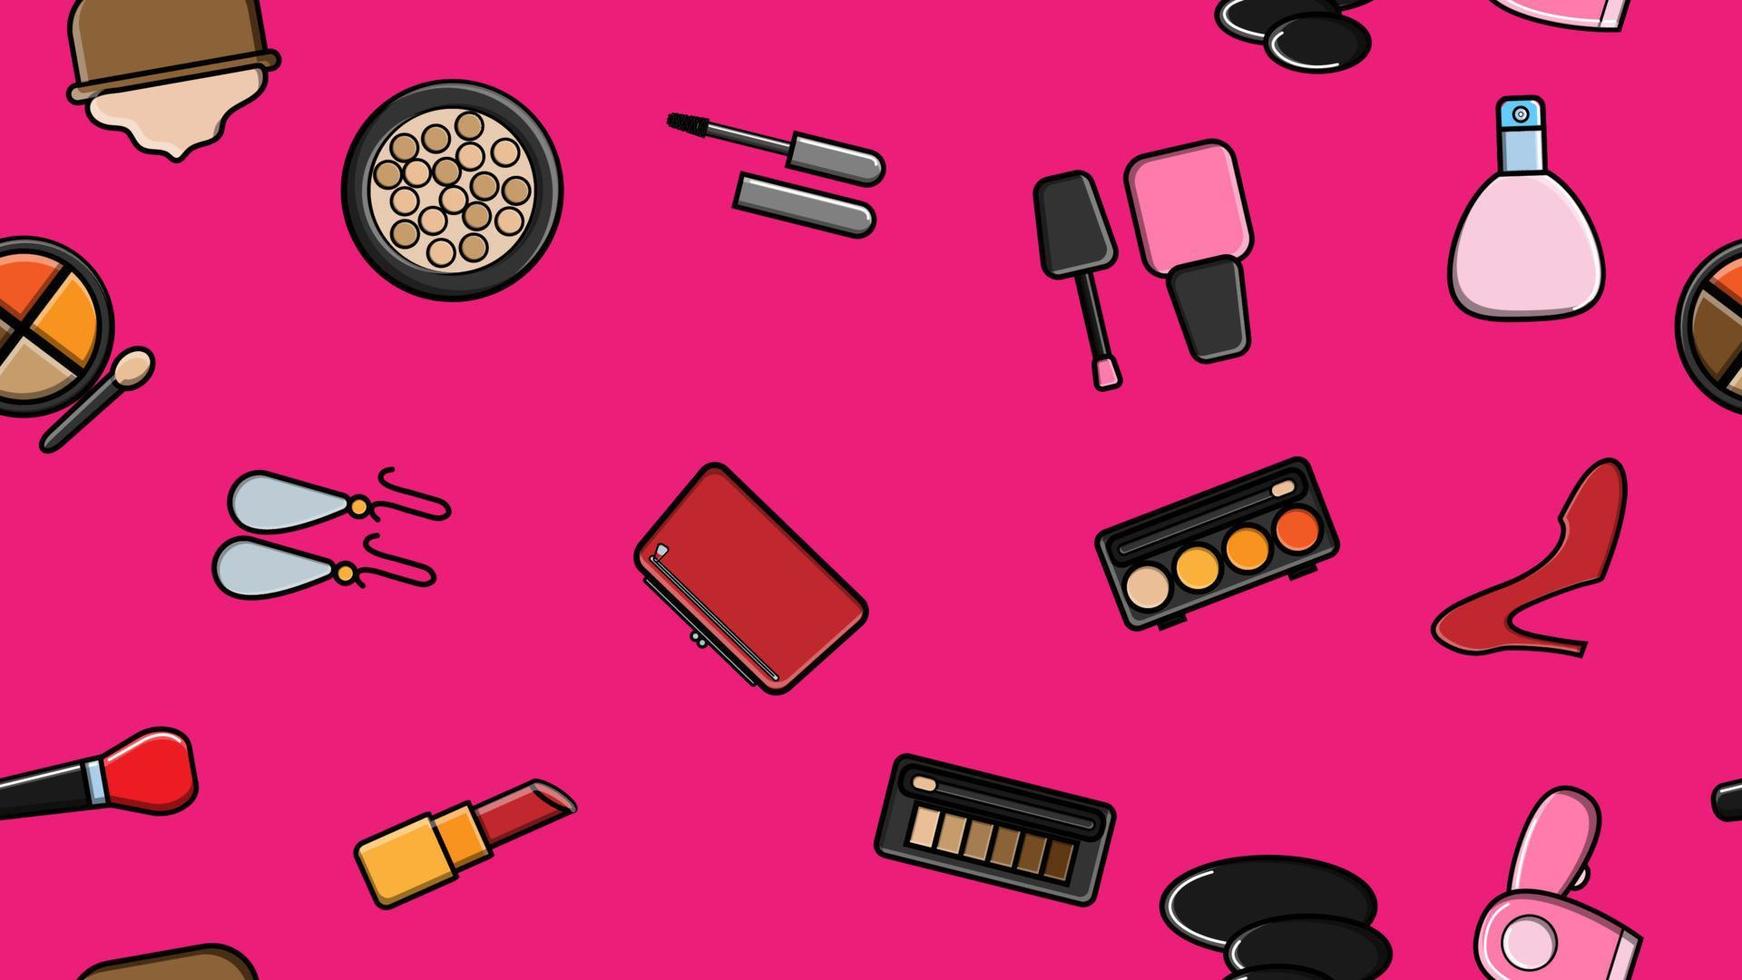 Endless seamless pattern of beautiful beauty items of female glamorous fashionable powders, lipsticks, varnishes, creams, cosmetics on a pink background. Vector illustration